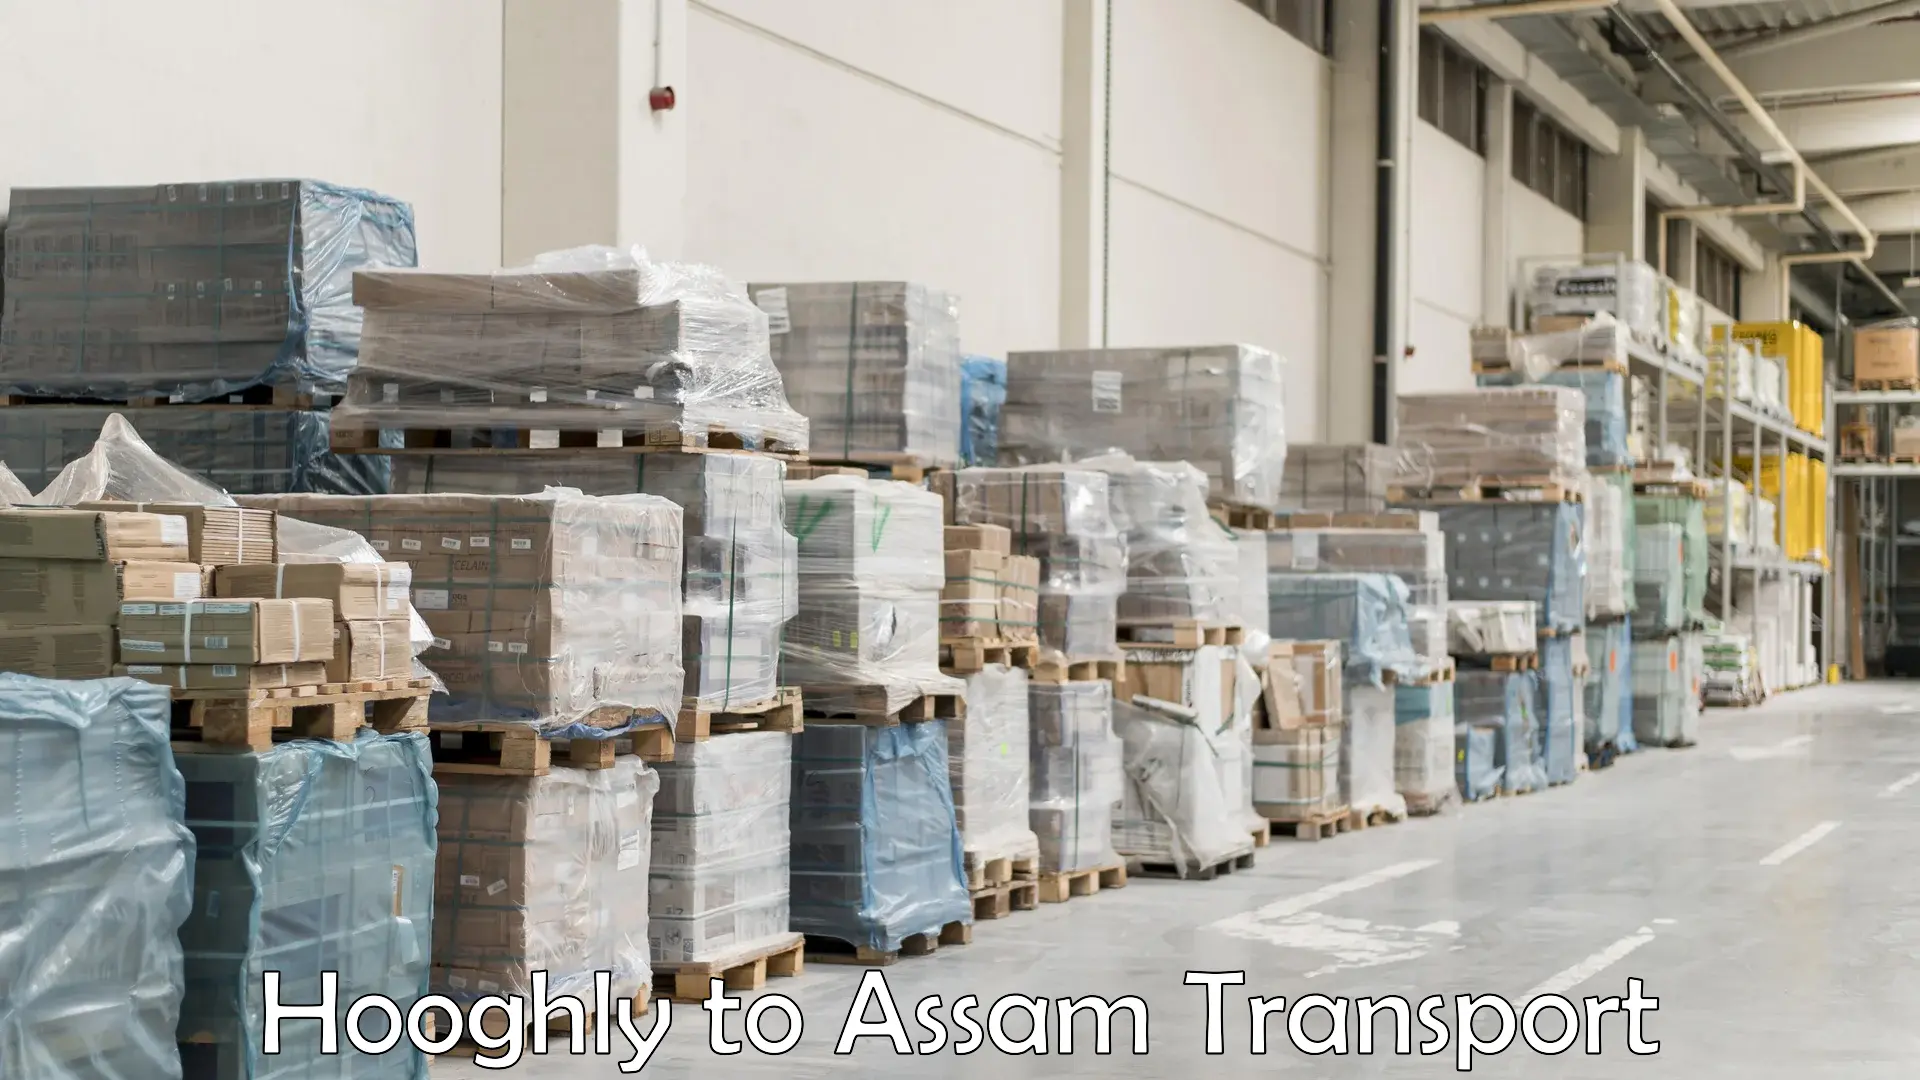 Goods delivery service Hooghly to Assam